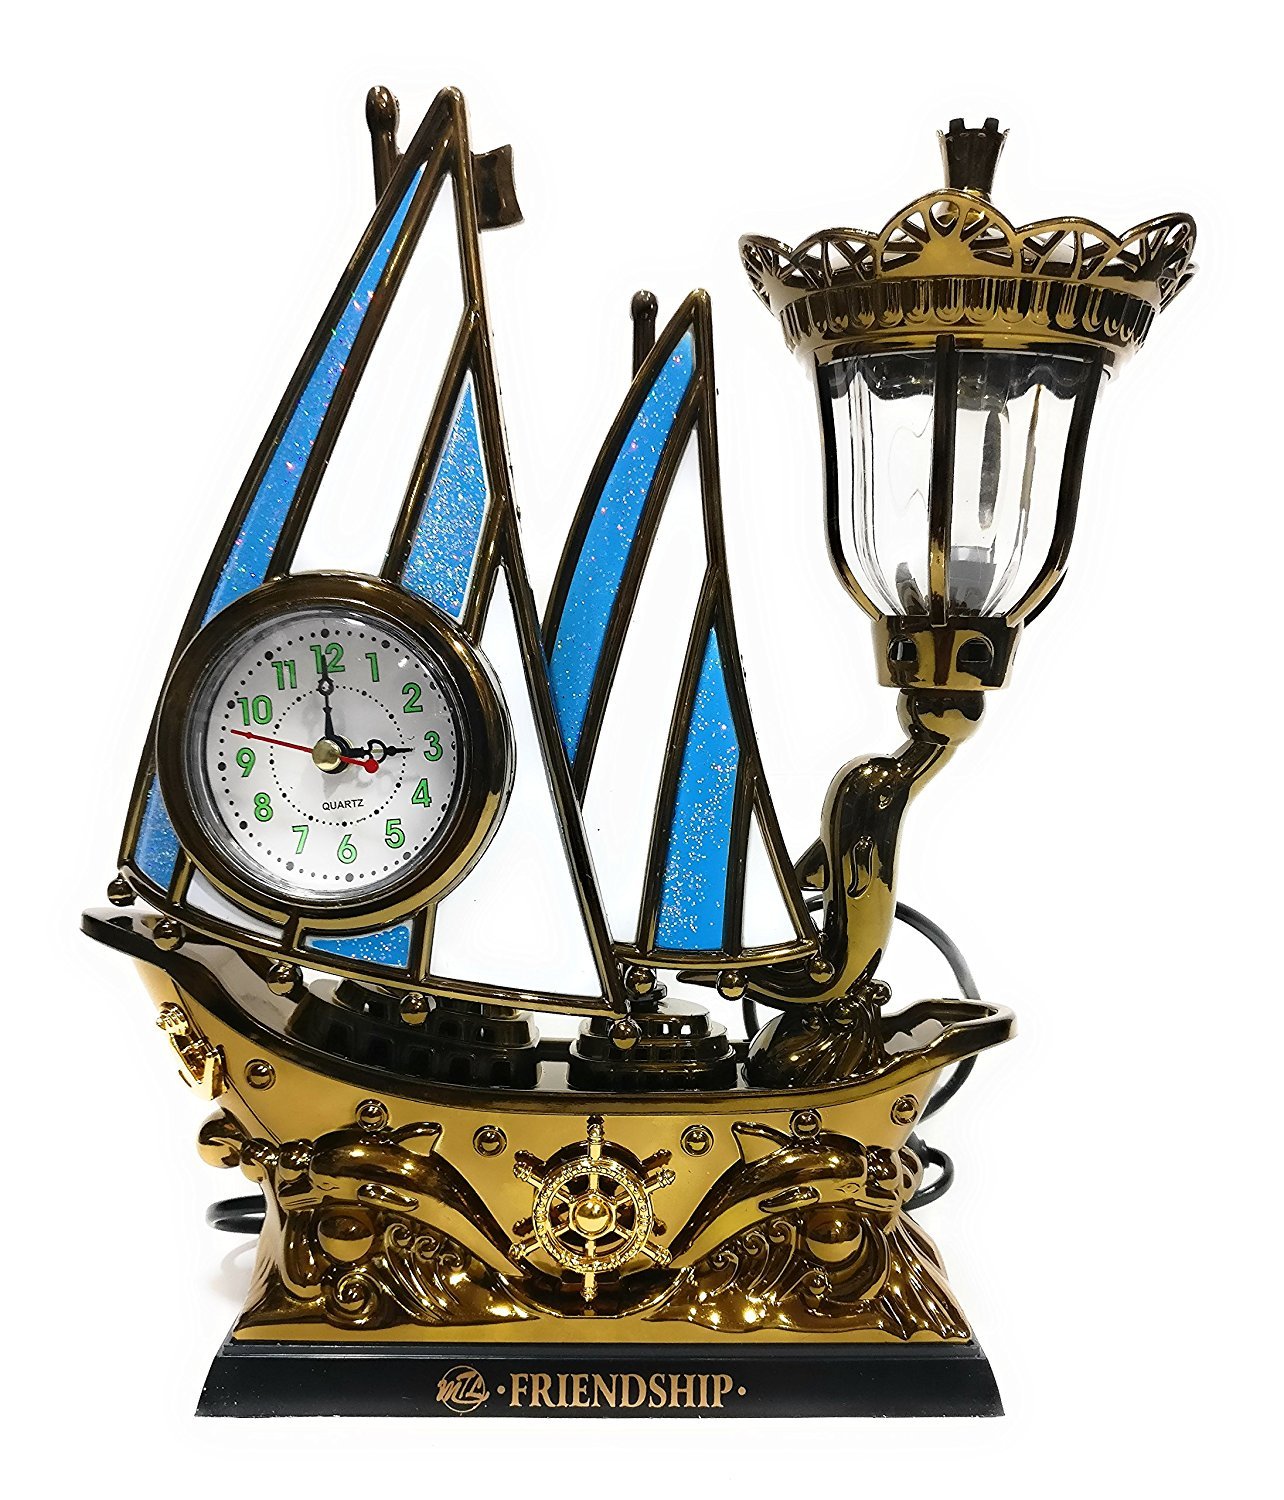 FunkyTradition Blue Golden Flag Vintage Pirates Ship Table Lamp with Alarm Clock for Christmas, Anniversary, Birthday Gift, Home and Office Decor - FunkyTradition